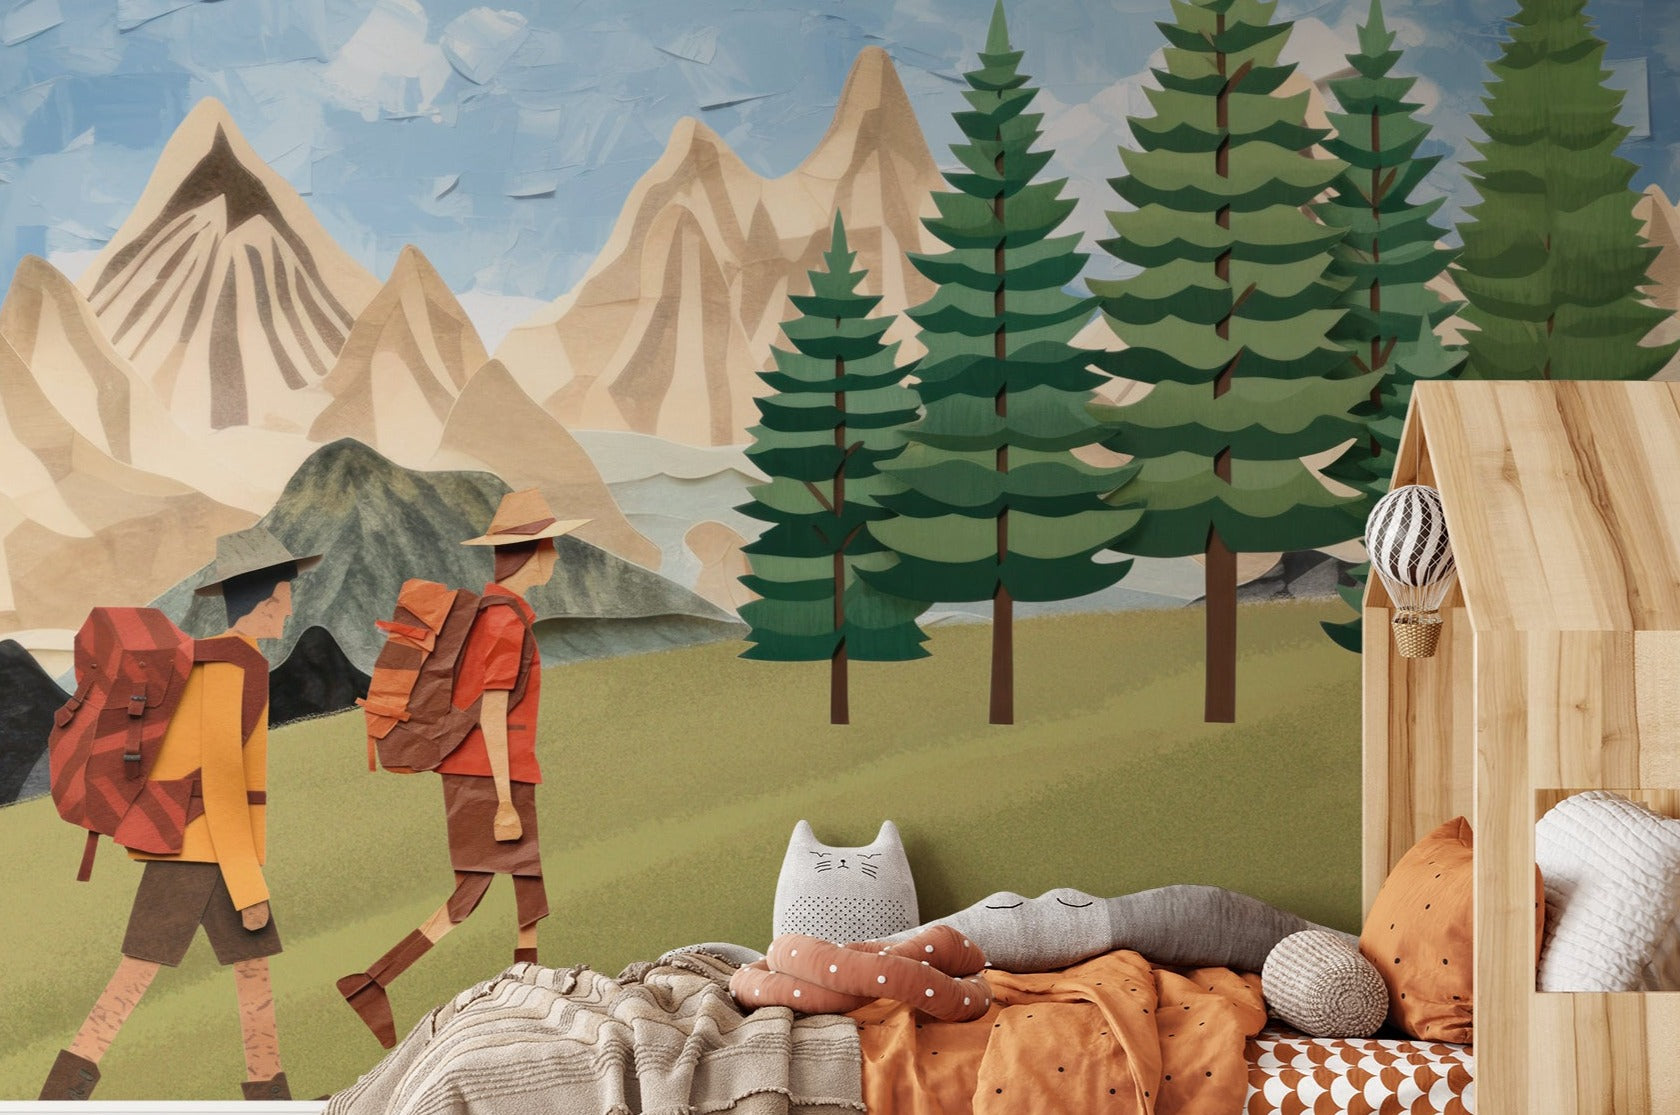 "Illustrative wallpaper mural in a children's room depicting two hikers walking through a stylized forest with towering mountains in the background.